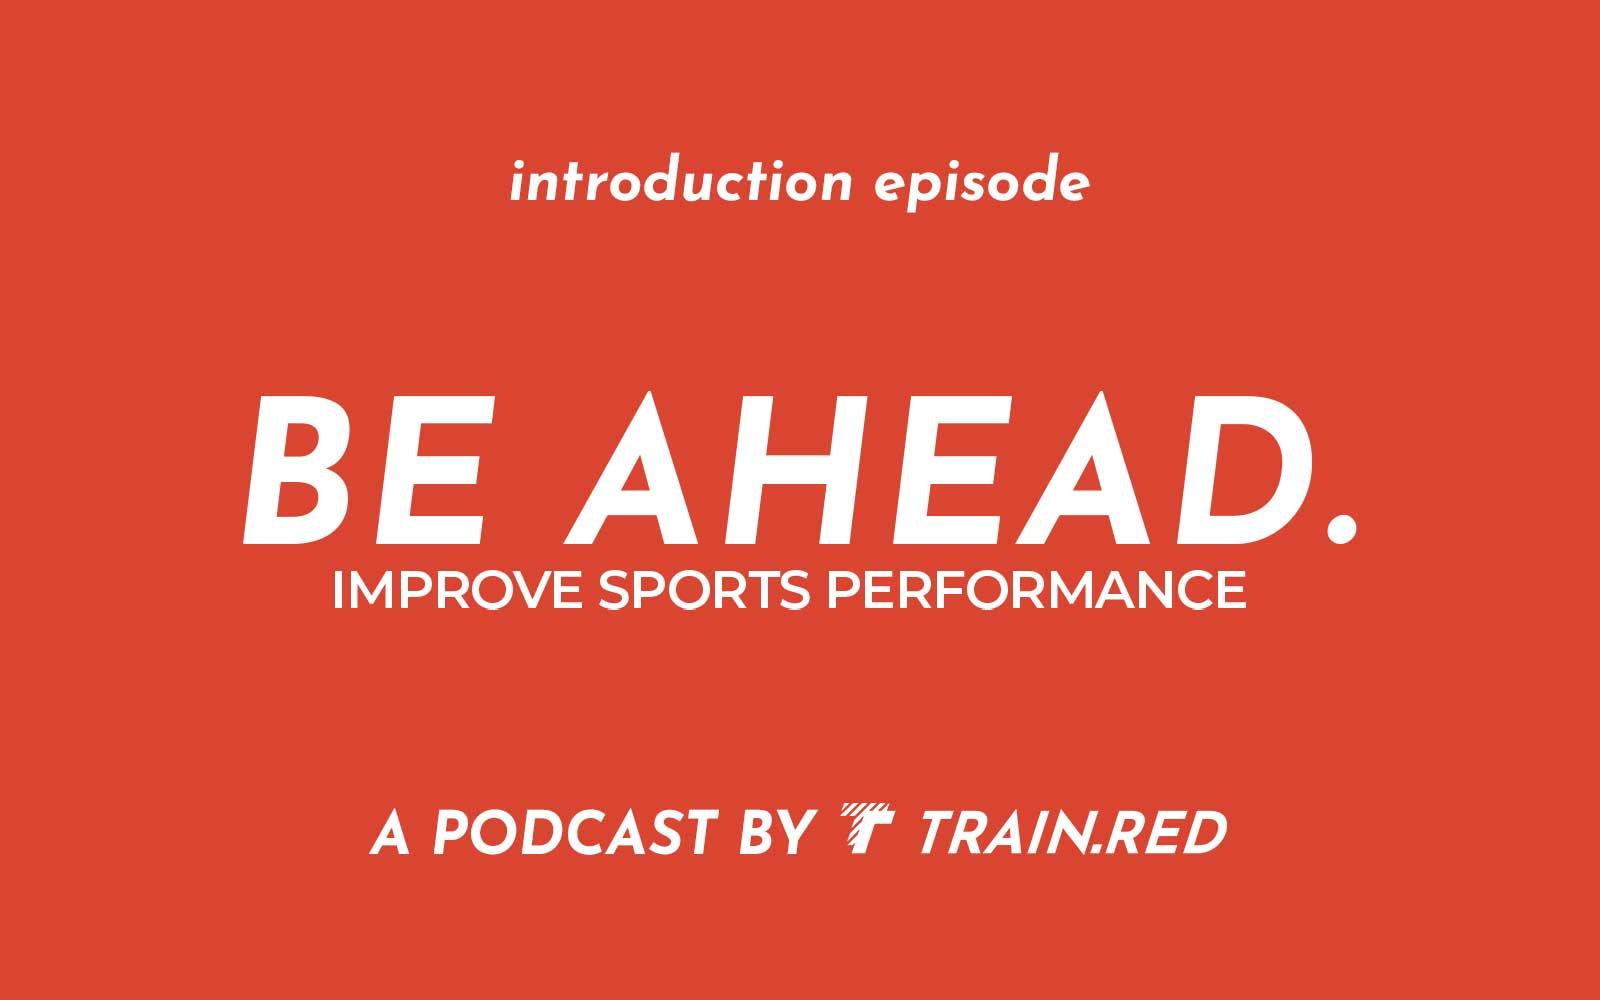 The start of the podcast BE AHEAD. train-red